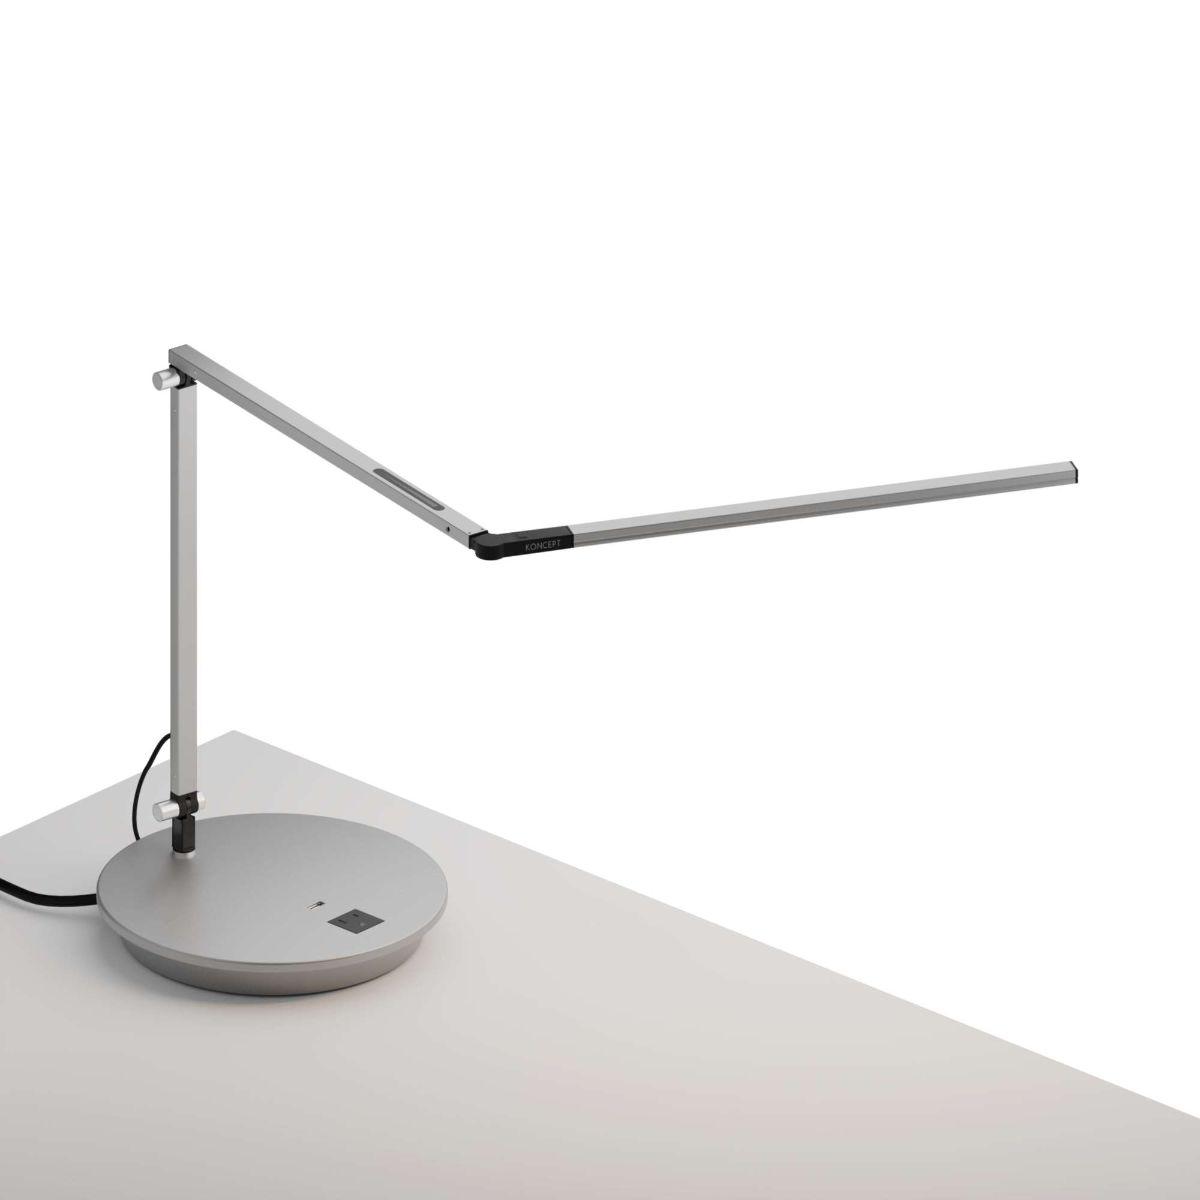 Z-Bar Slim Contemporary Neutral White LED Desk Lamp with Power Base and USB Port